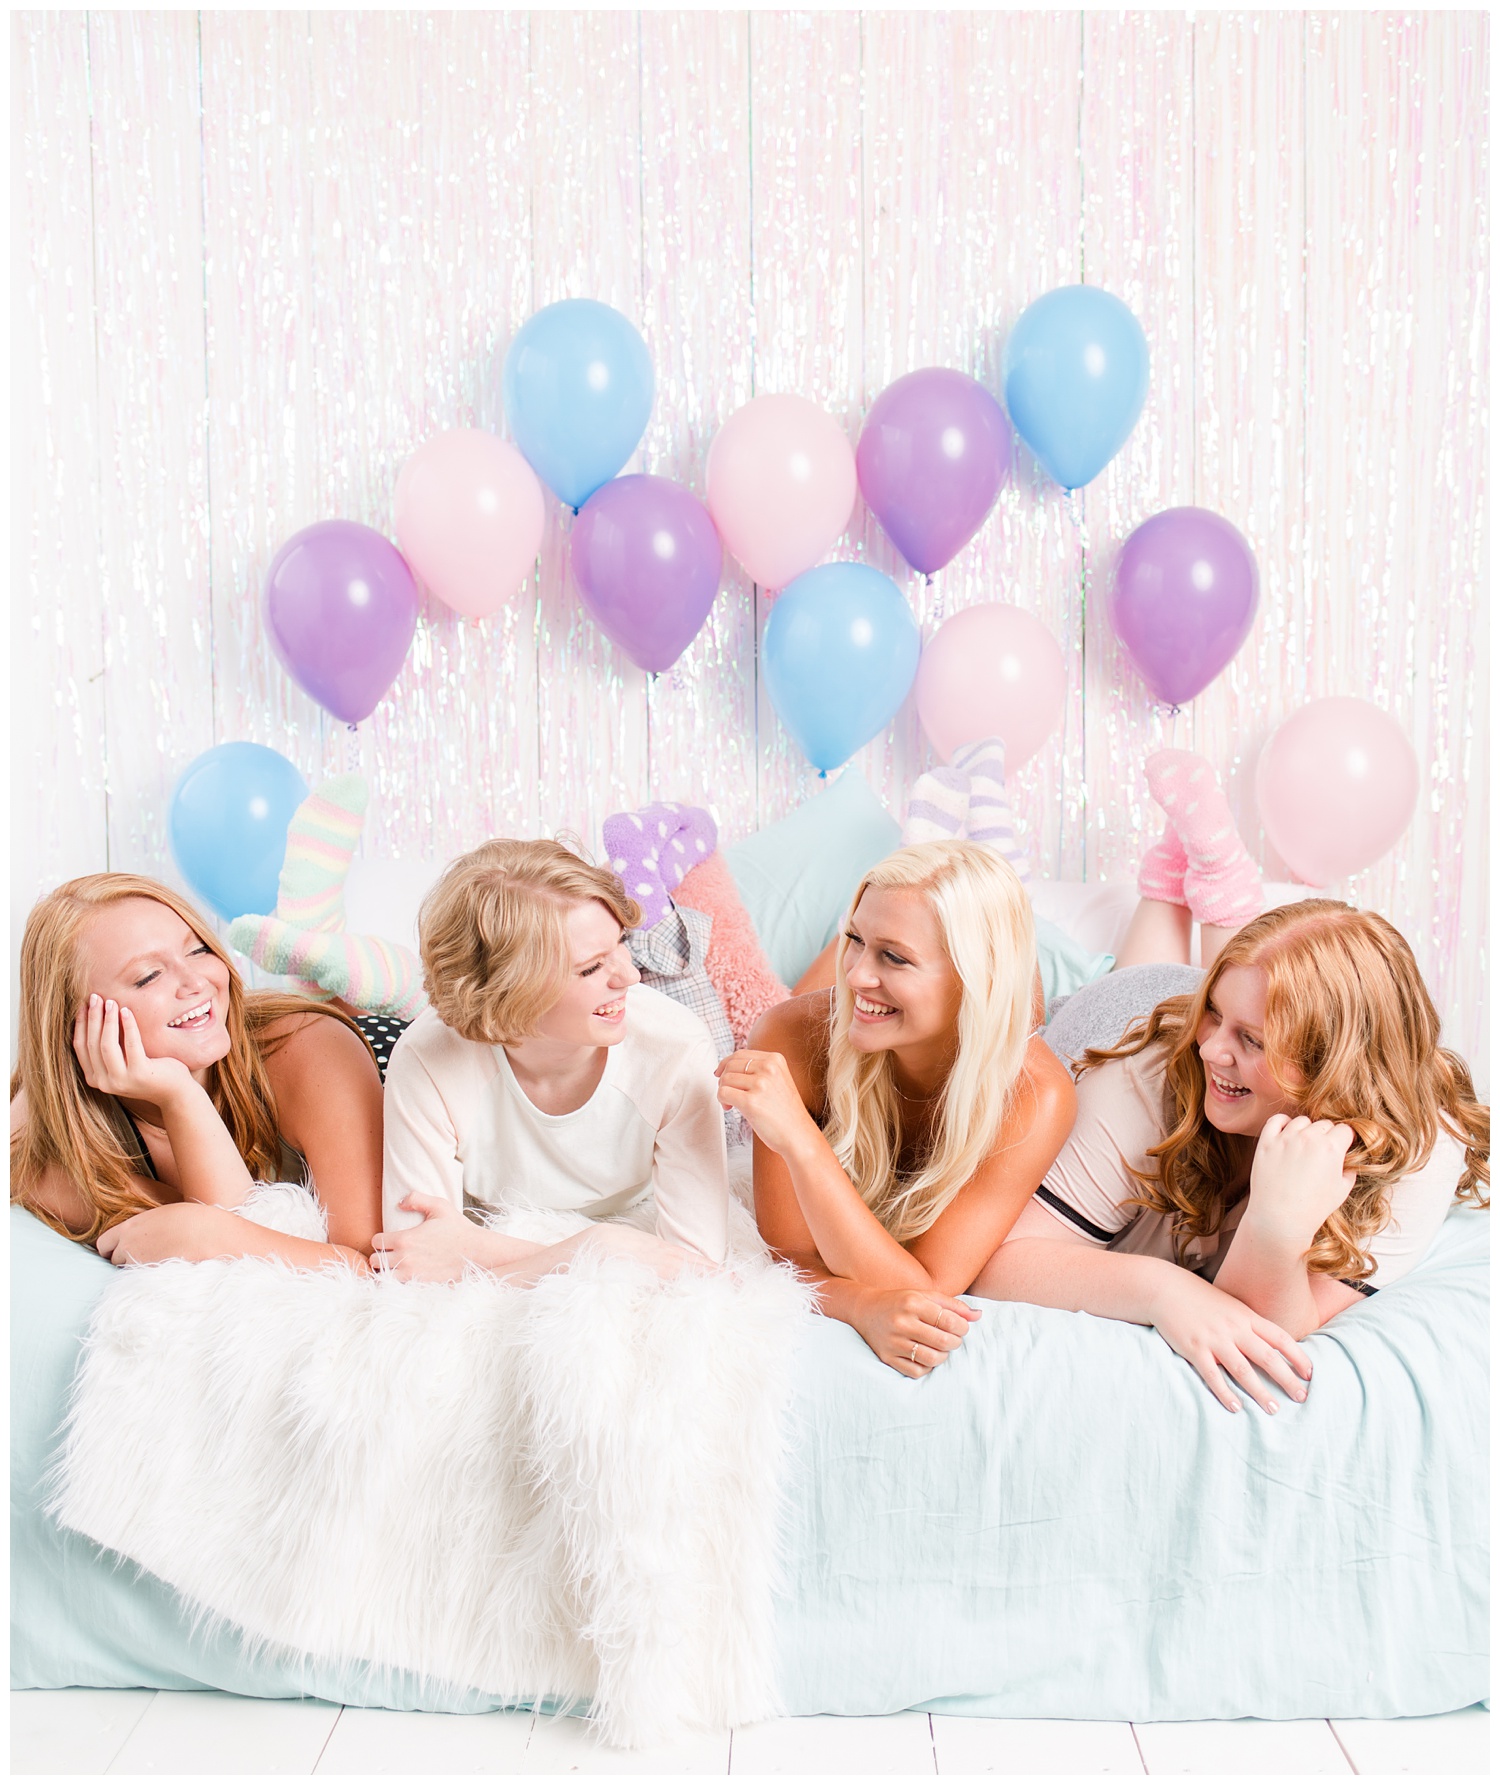 Senior girls laying on a bed and laughing during a senior sleepover-styled photoshoot with iridescent streamers and balloons. | CB Studio